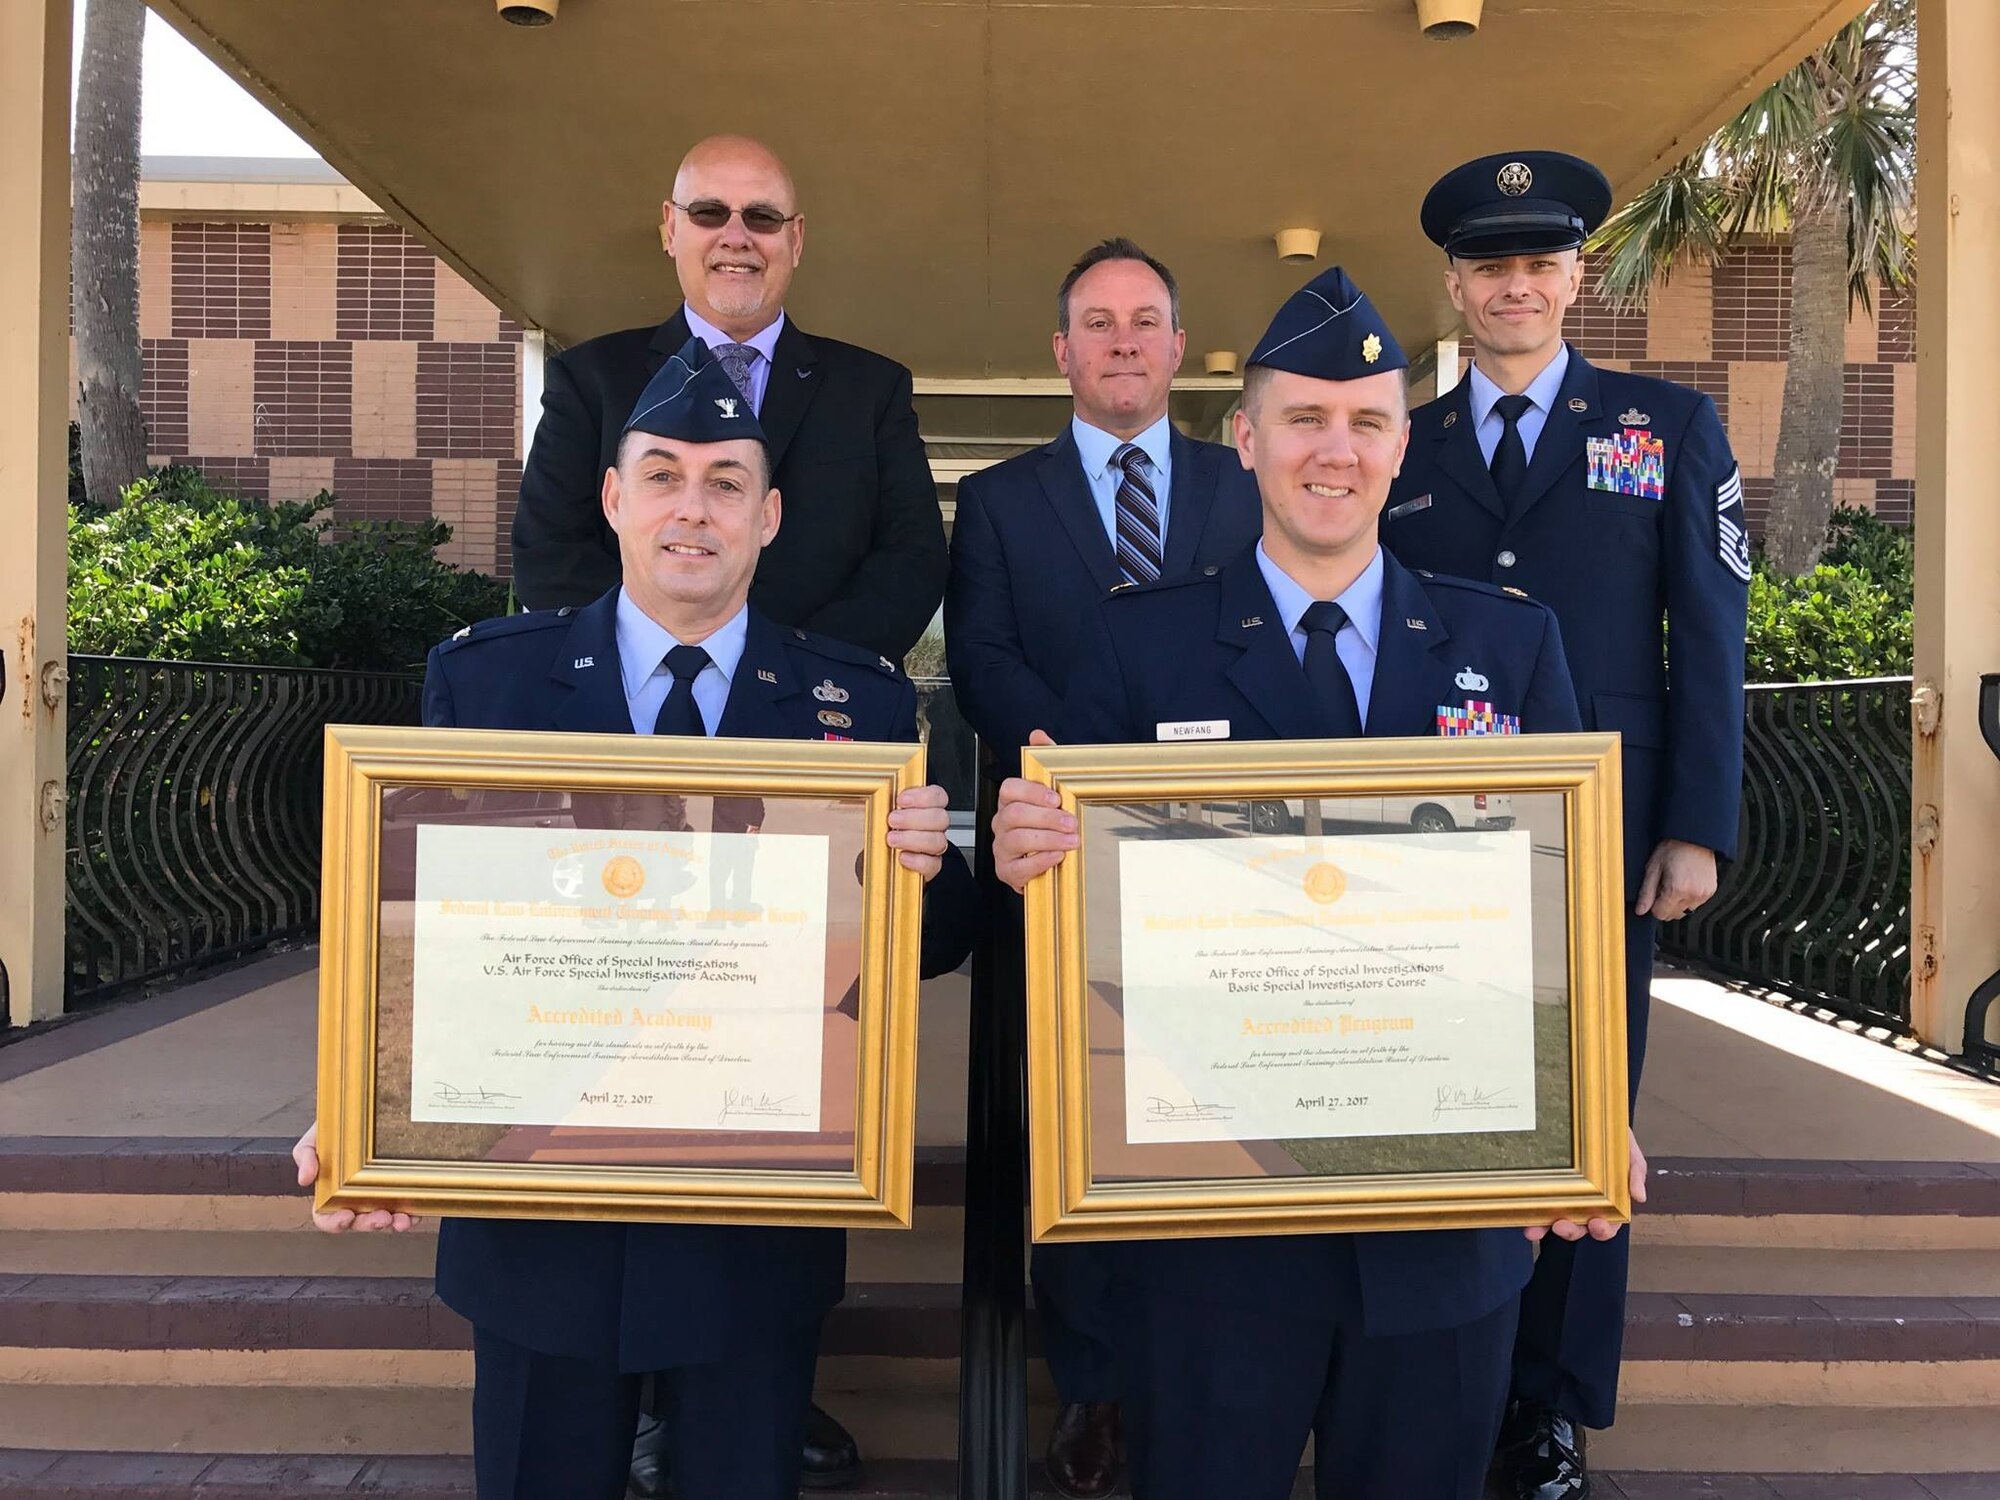 Col. Garry Little, AFSIA Commander, and Maj. Seth Newfang, AFSIA Chief, Basic Training Division, proudly show the reaccreditations AFSIA and the AFOSI Basic Investigators Course were granted by the Federal Law Enforcement Training Accreditation Board April 27, 2017. Joining them are, left to right, Mr. Dave Bynum, AFSIA Chief, Training Management Division, Mr. Greg Lynch, AFSIA Deputy Director and Chief Master Sgt. Gregory Carmack, AFSIA Superintendent. (AFSIA photo)     